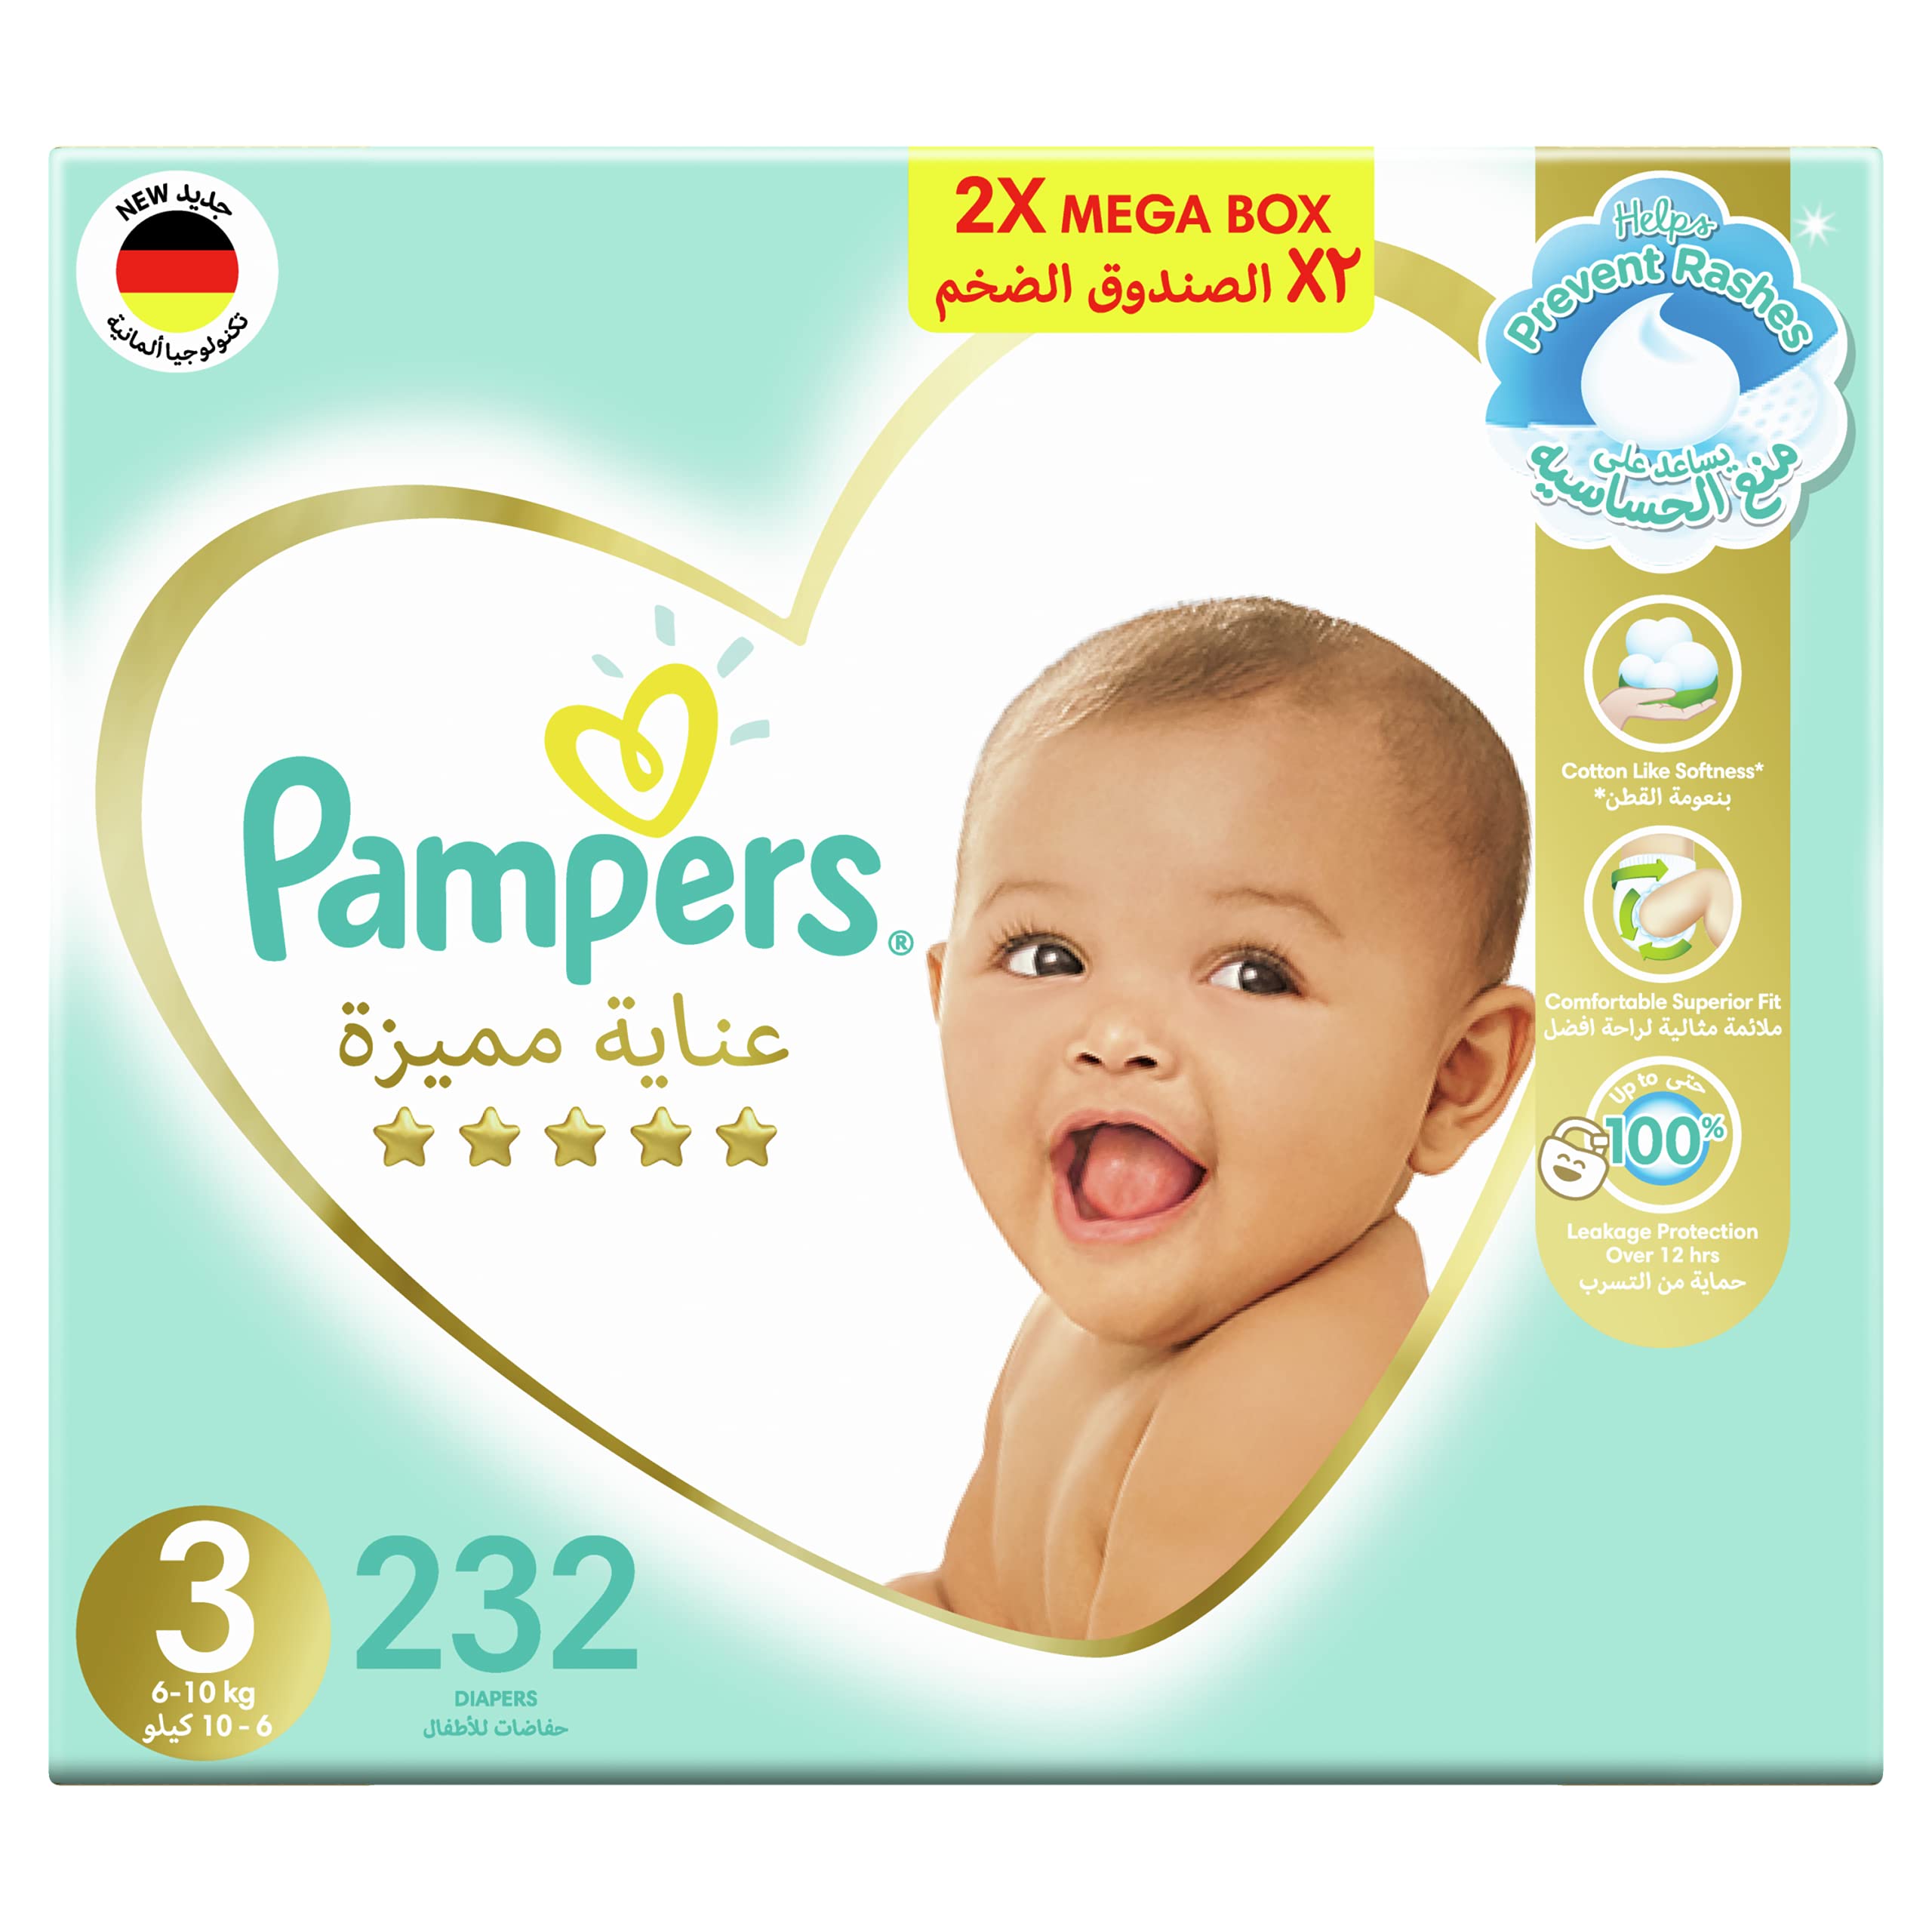 Pampers Premium Care Diapers, Size 3, 6-10 Kg, The Softest Diaper And The Best Skin Protection, 232 Baby Diapers حفاضات بامبرز عناية مميّزة، مقاس 3، وسط، 5-9 كلغ، صندوق ضخم مزدوج، 232 حفاض